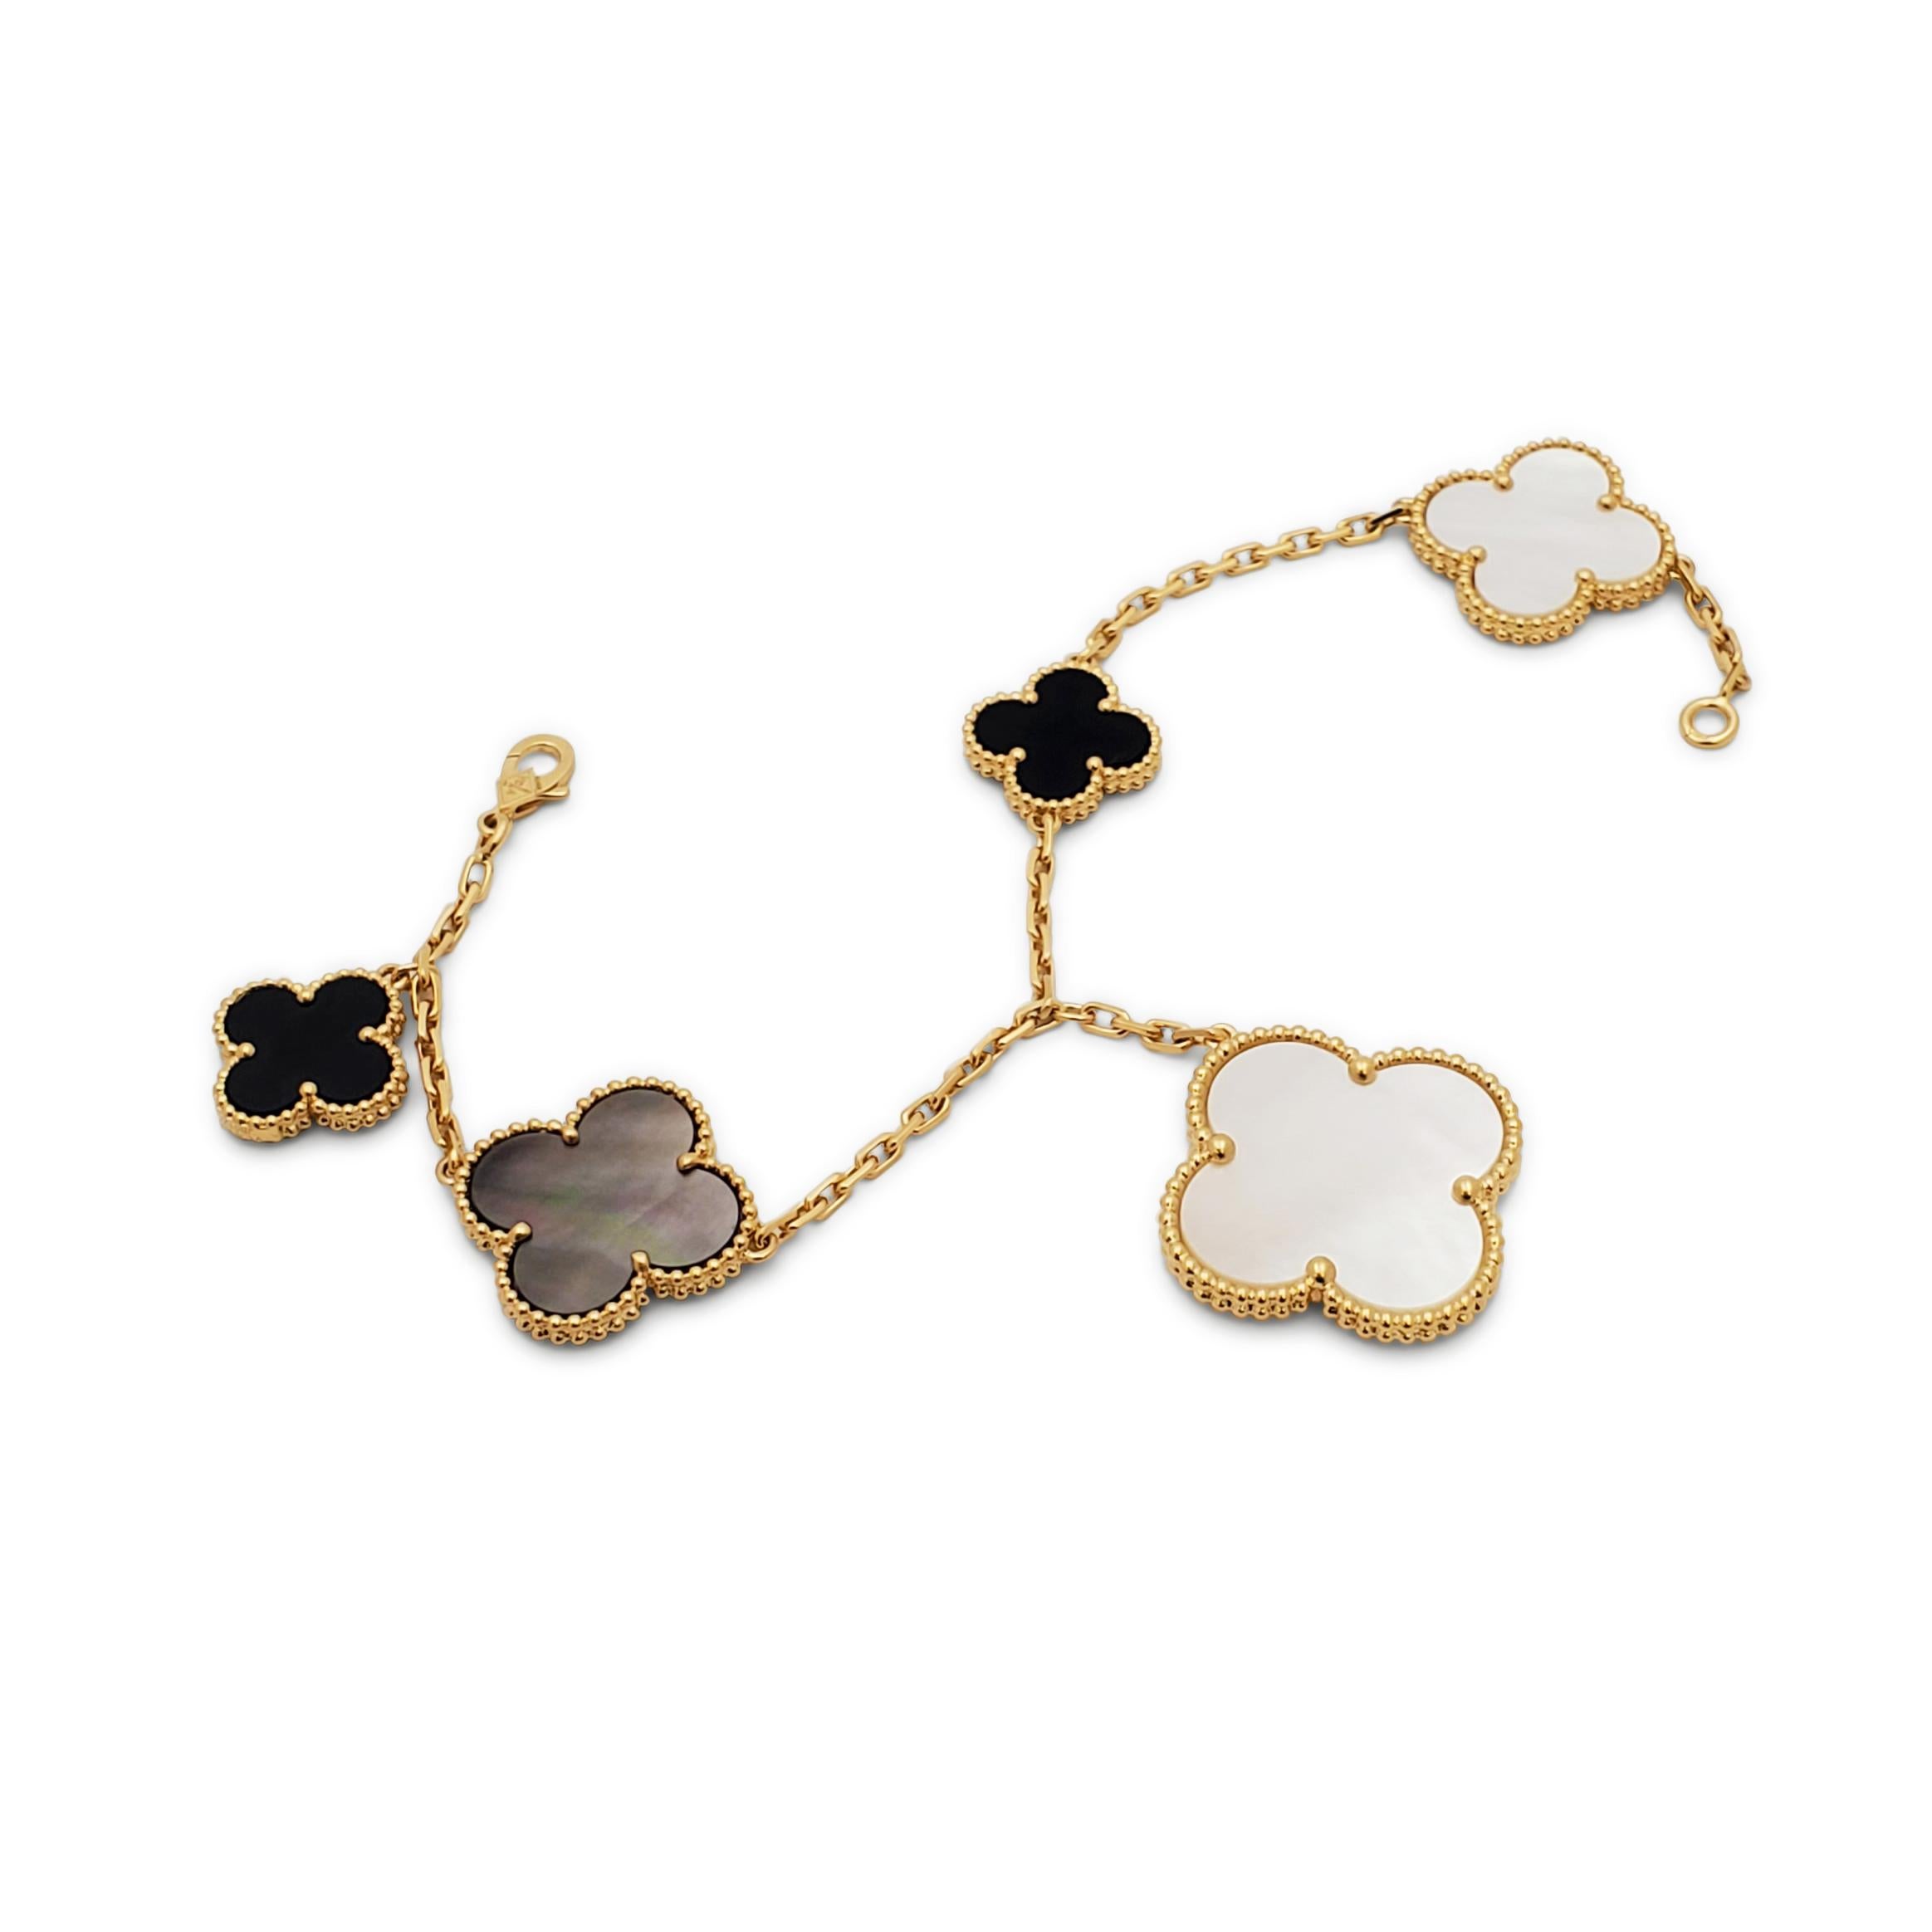 Mixed Cut Van Cleef & Arpels Magic Alhambra Mother of Pearl and Onyx Bracelet